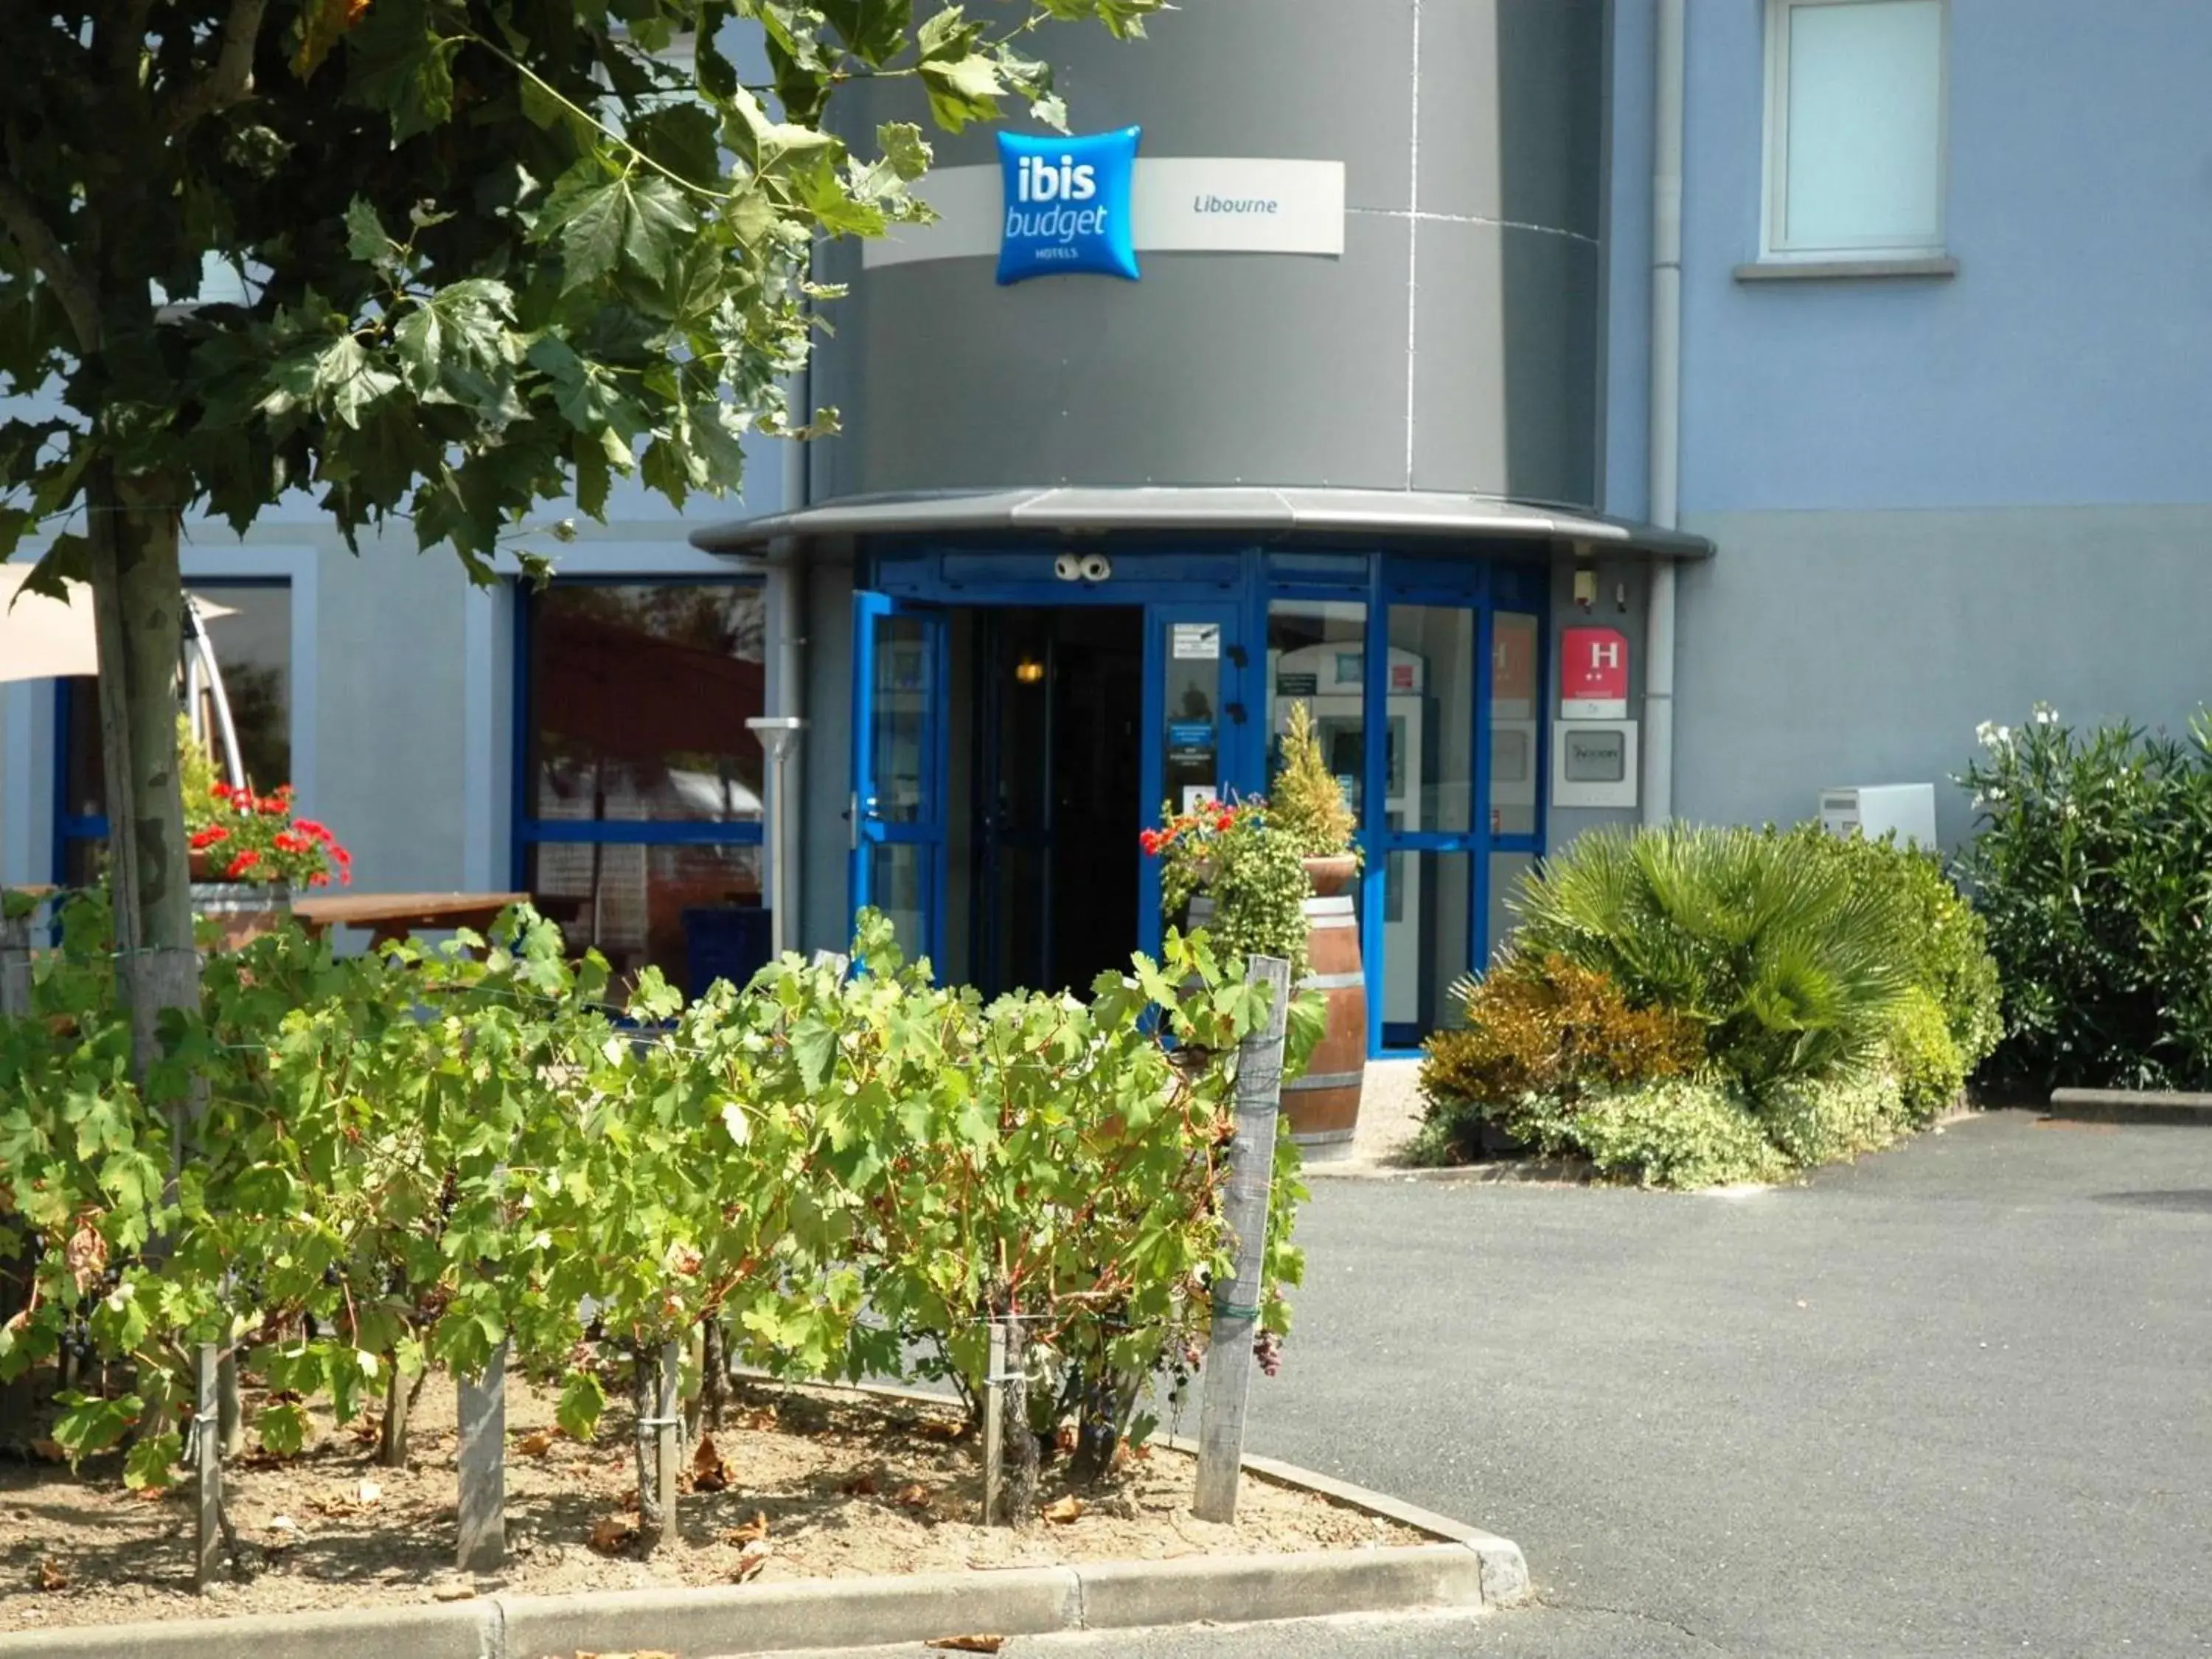 Property building in ibis budget Libourne